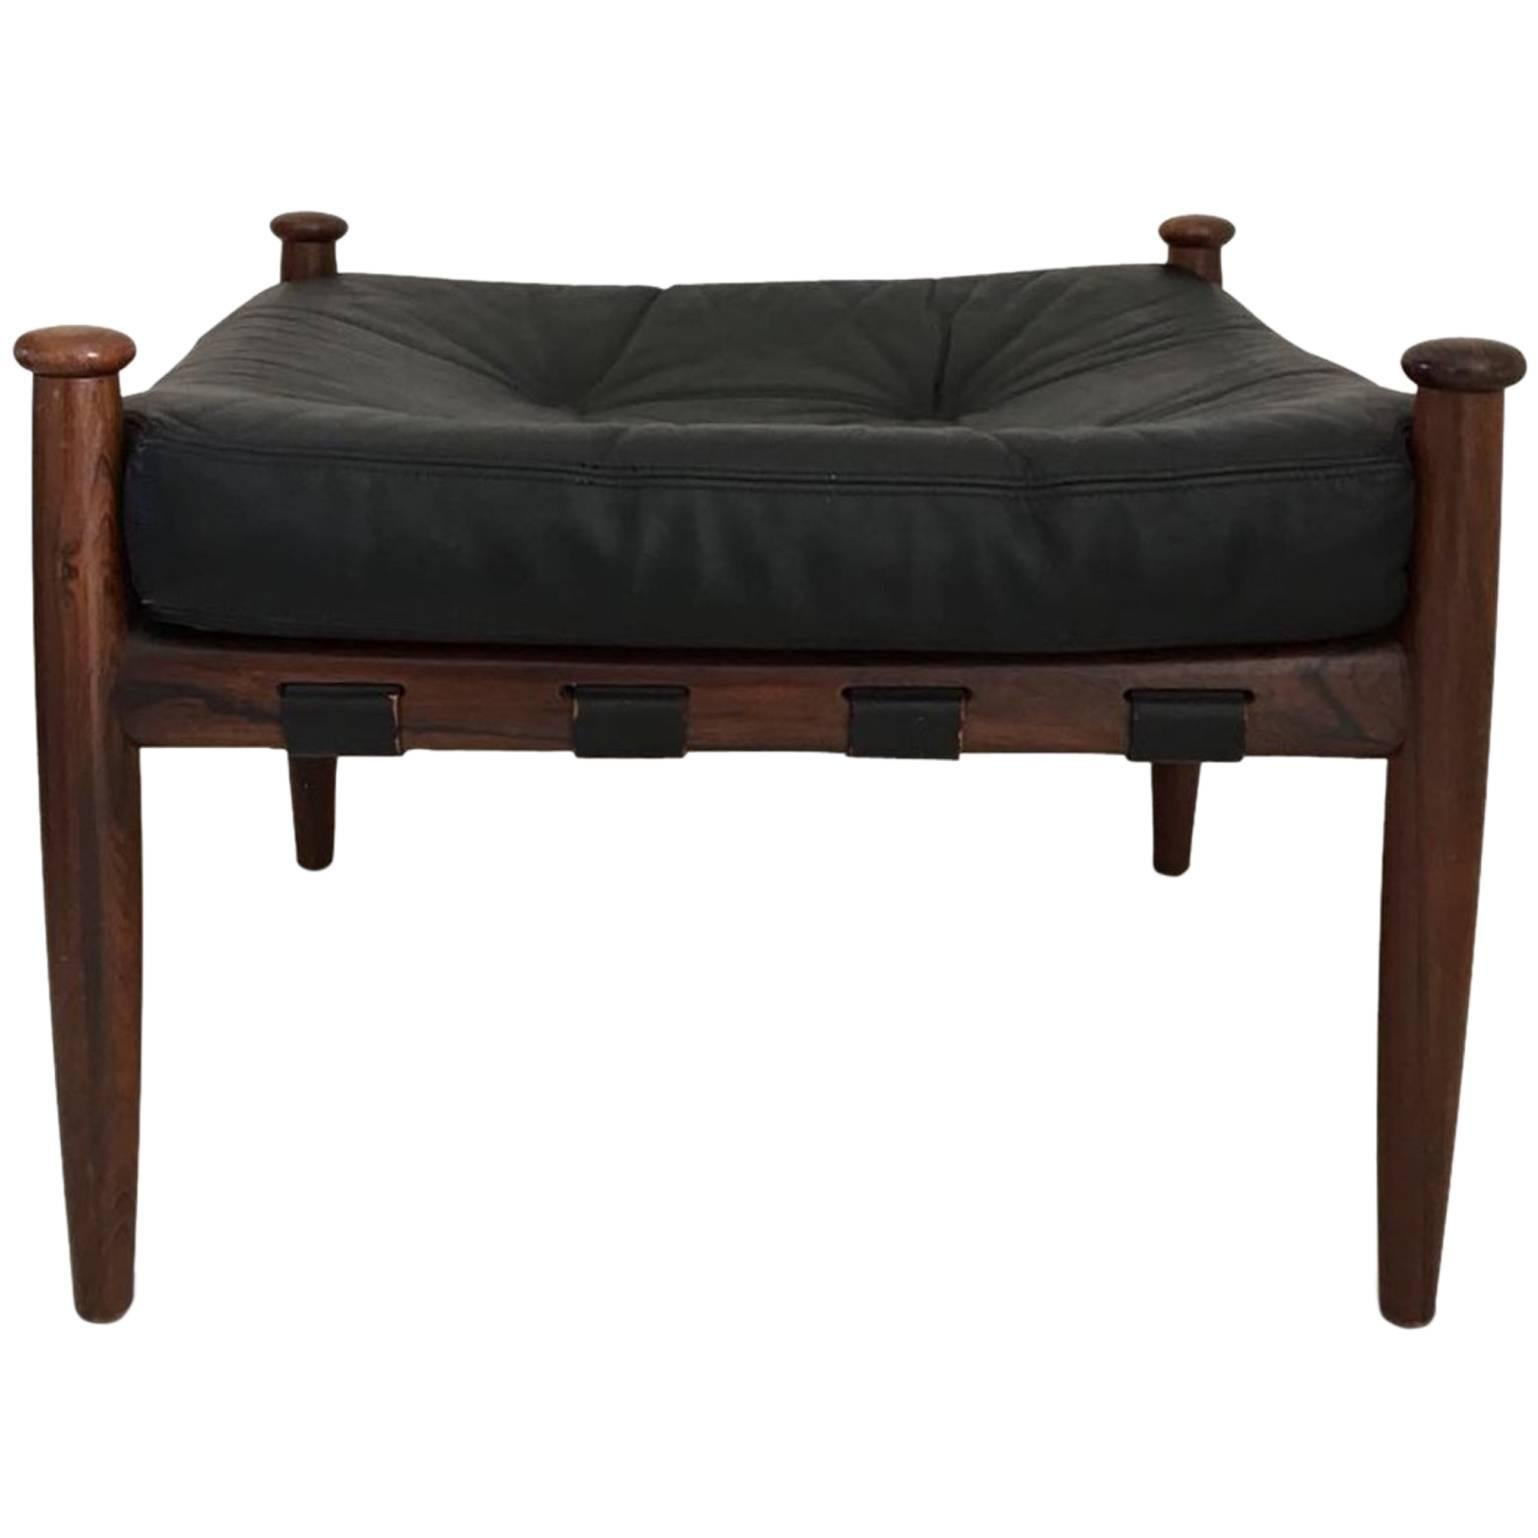 Eric Merthen Leather and Rosewood Ottoman, Footstool for Ire Mobler, 1960s